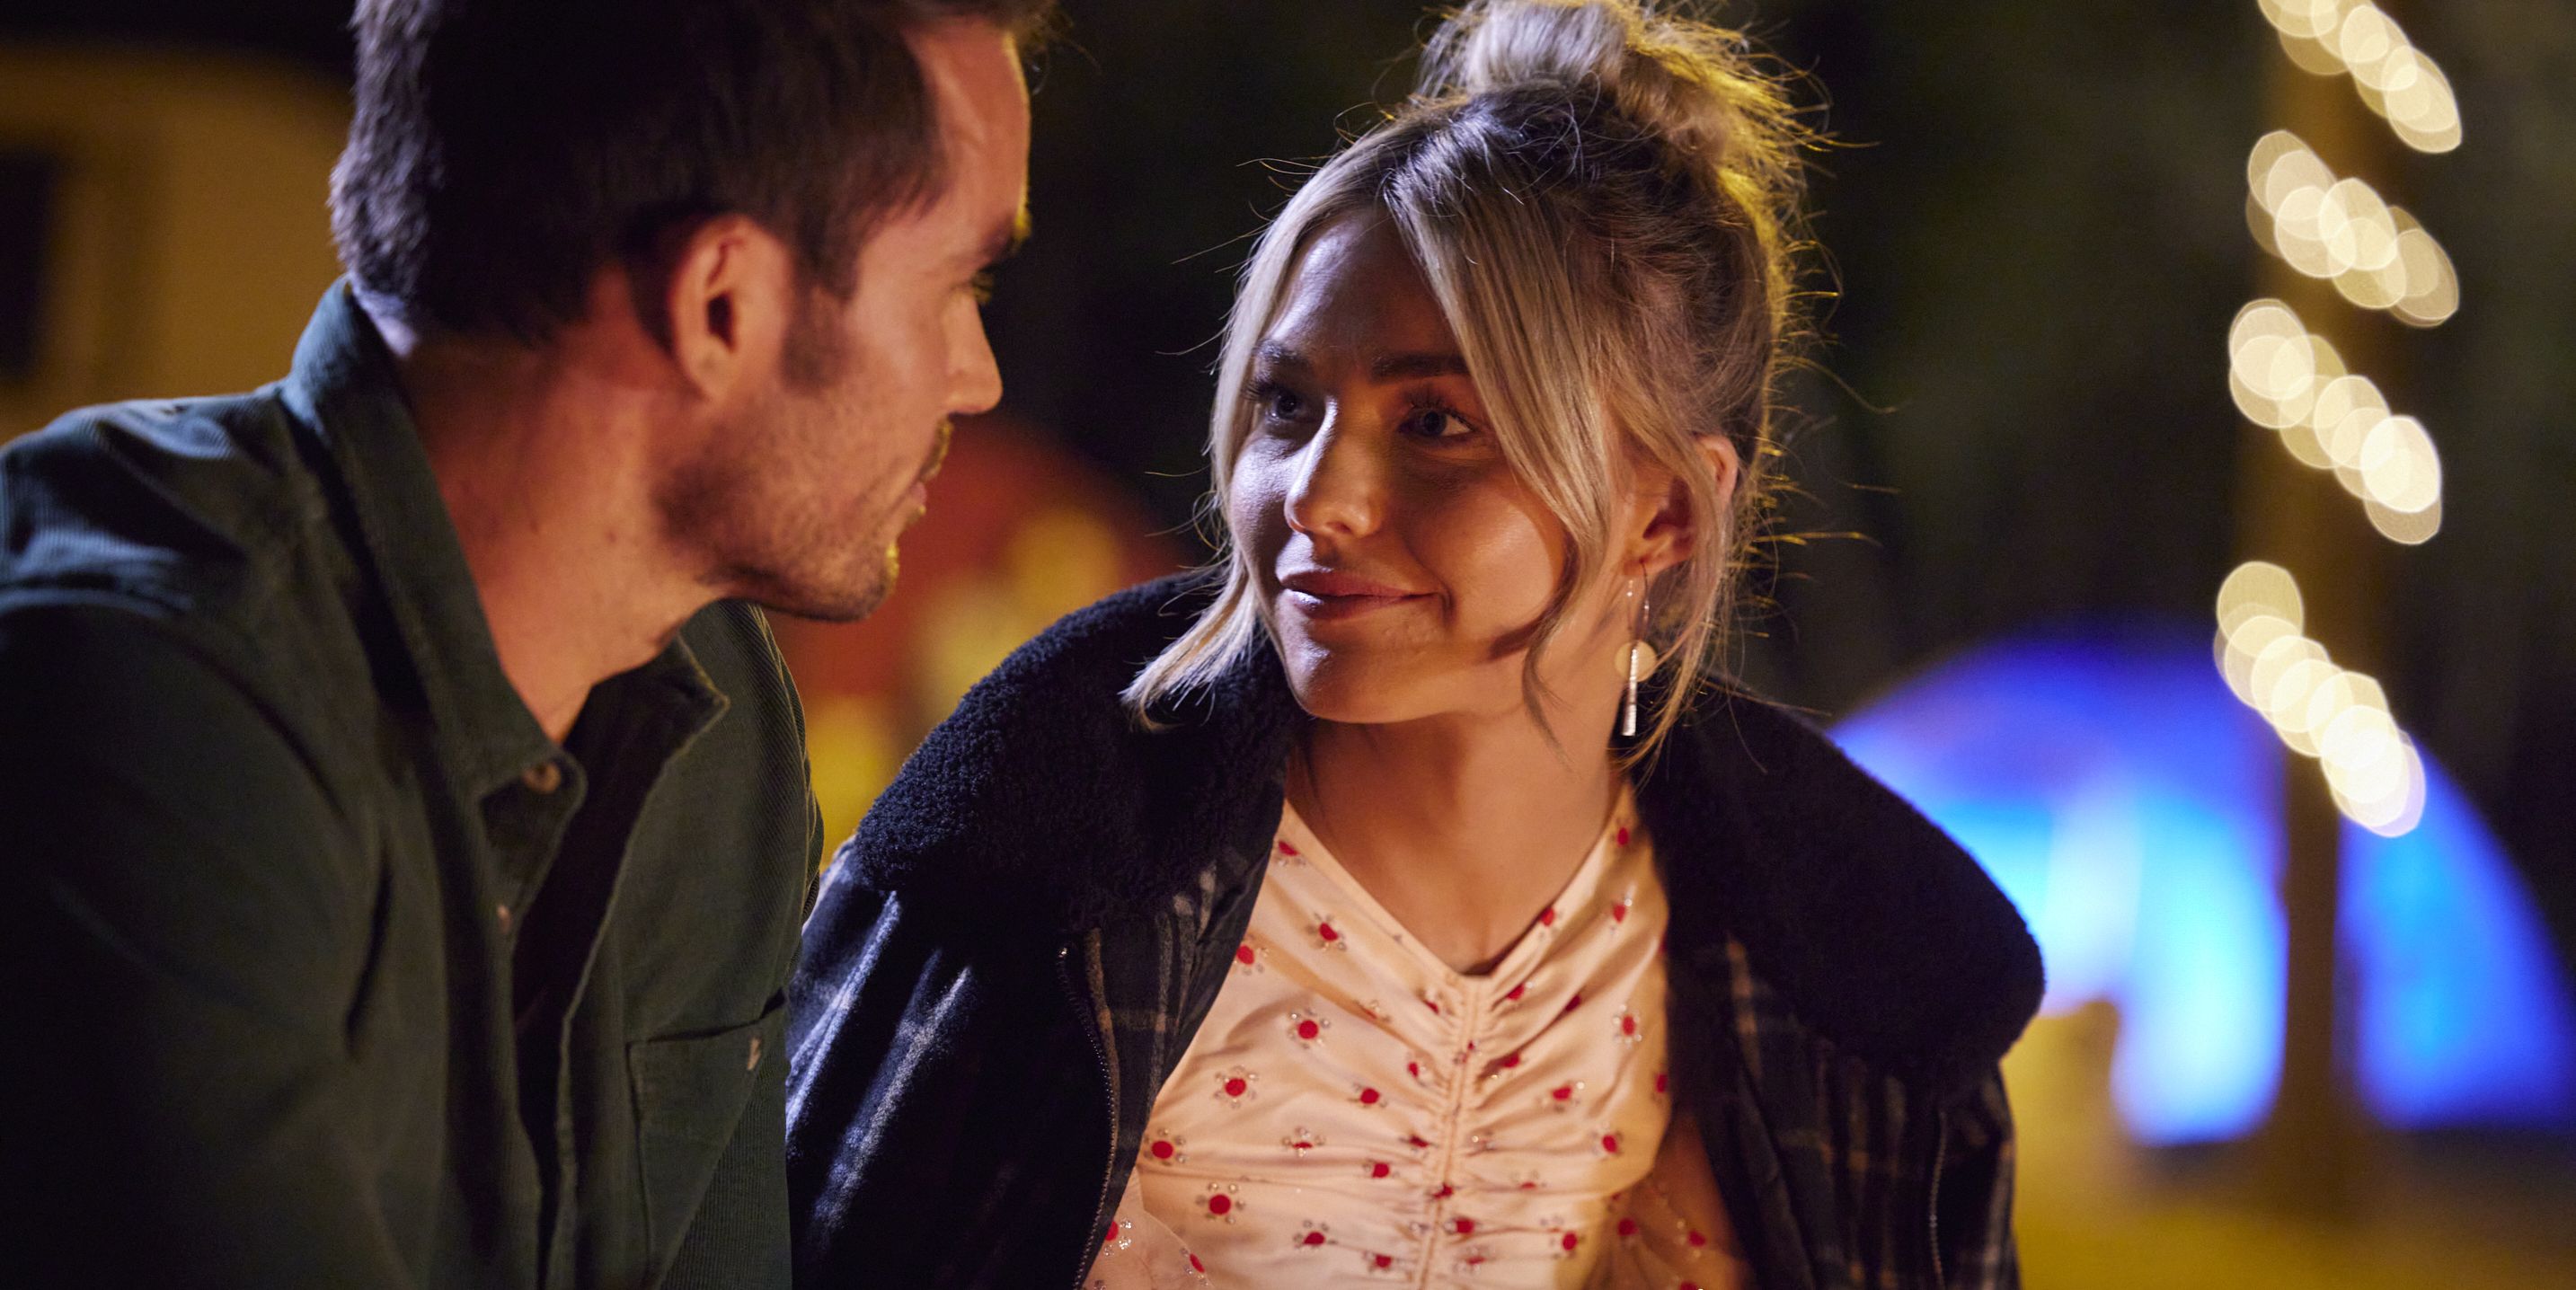 Home and Away updates fans on Jasmine's exit decision